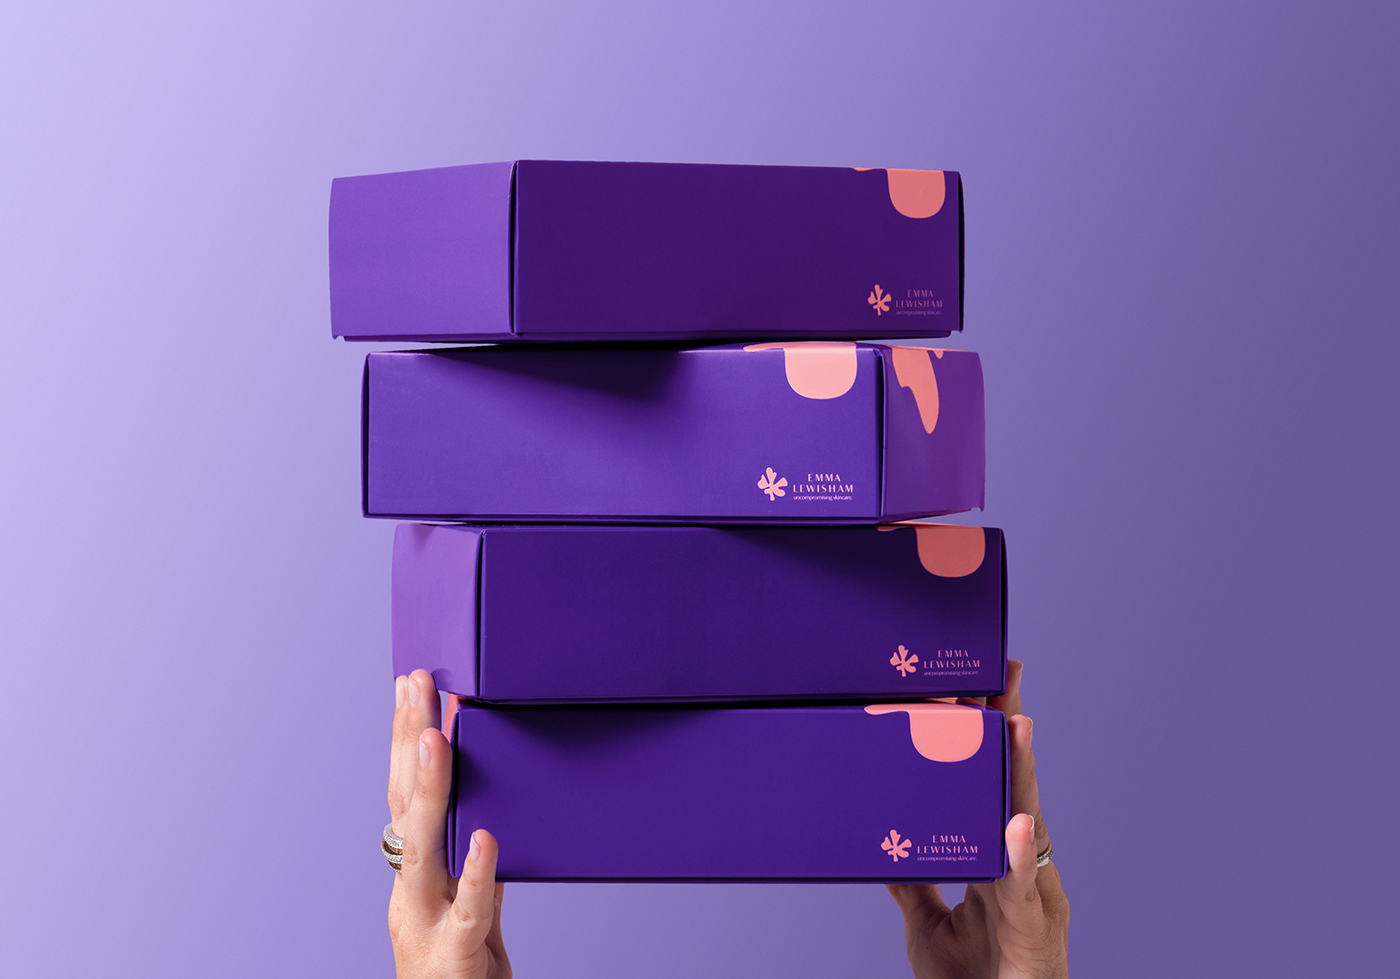 4 stacked purple ecommerce boxes for the natural skincare brand Emma Lewisham